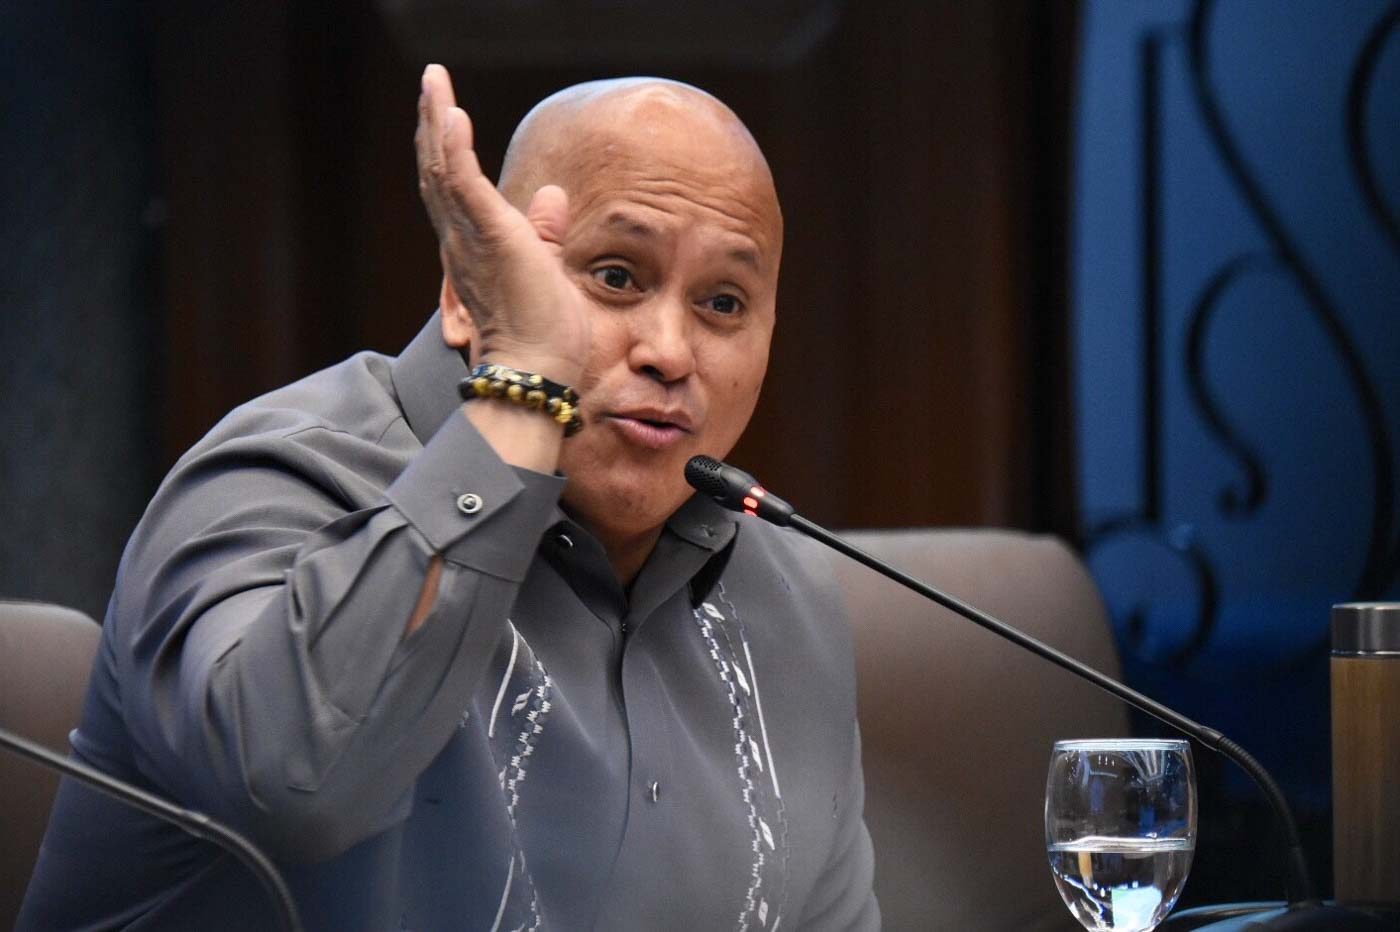 Dela Rosa: Are outbreaks created so vaccines make money?